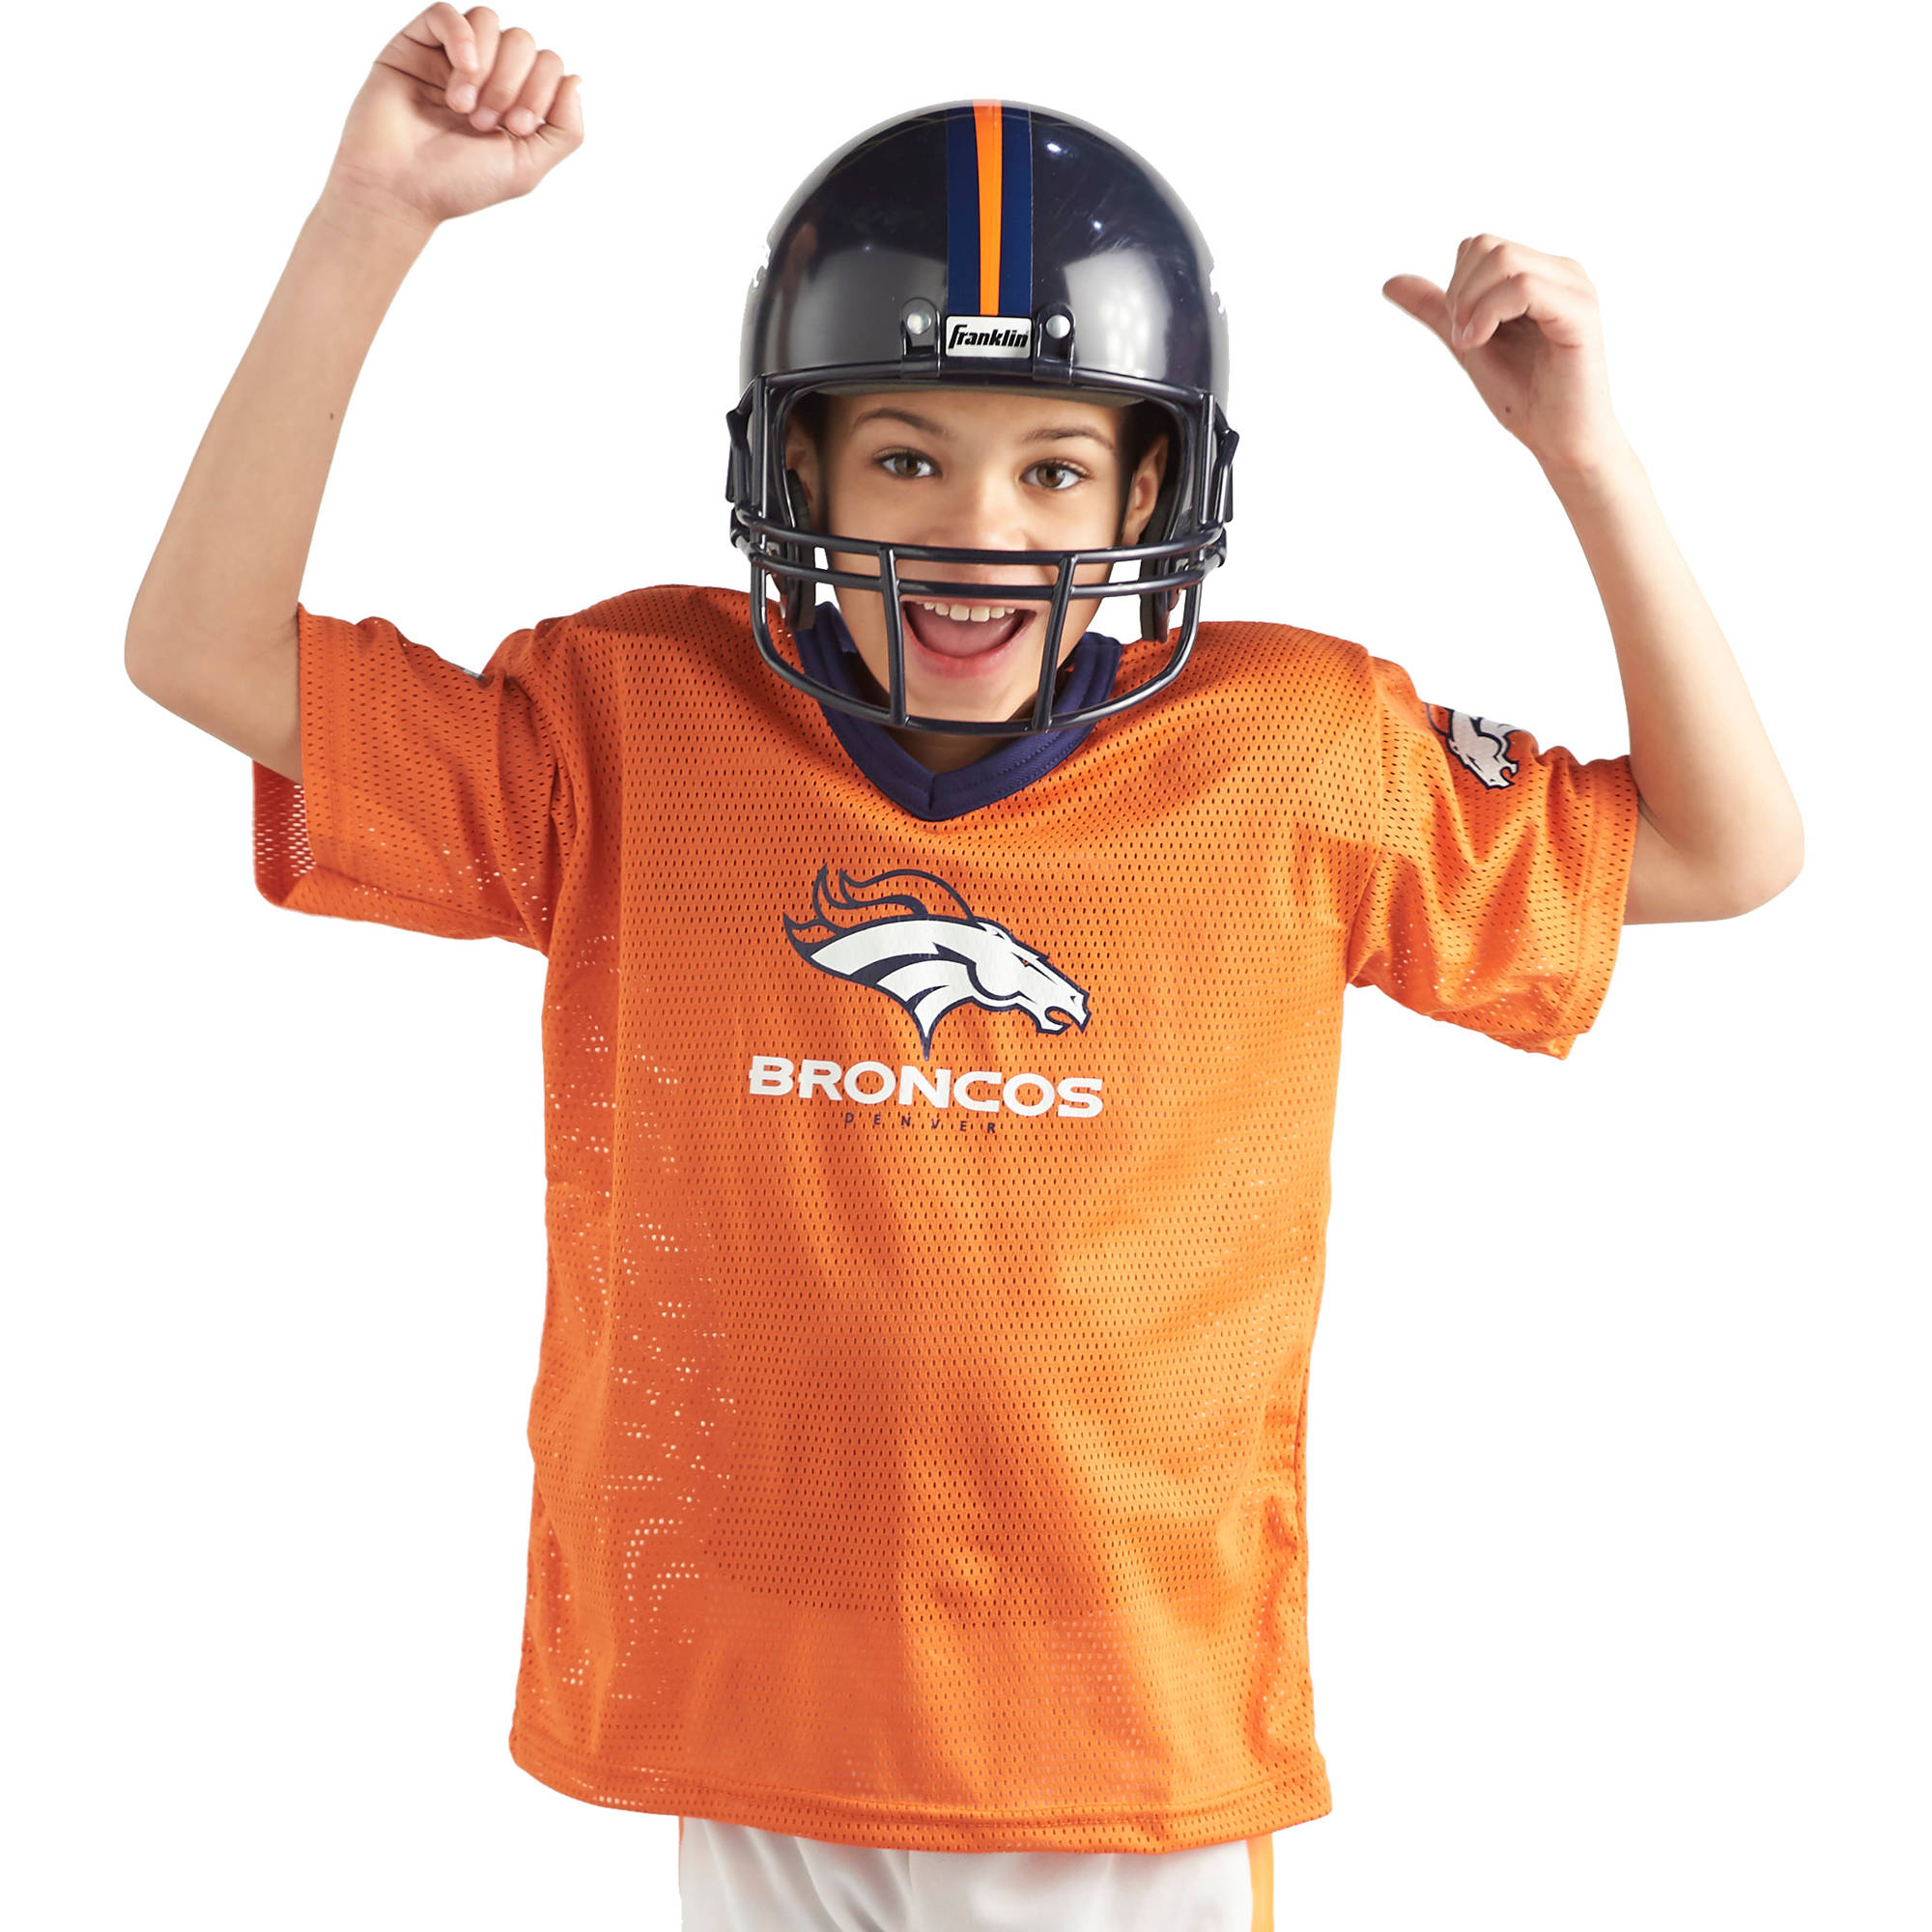 Franklin Sports NFL Youth Deluxe Uniform/Costume Football Set (Choose Team and Size) - image 2 of 5